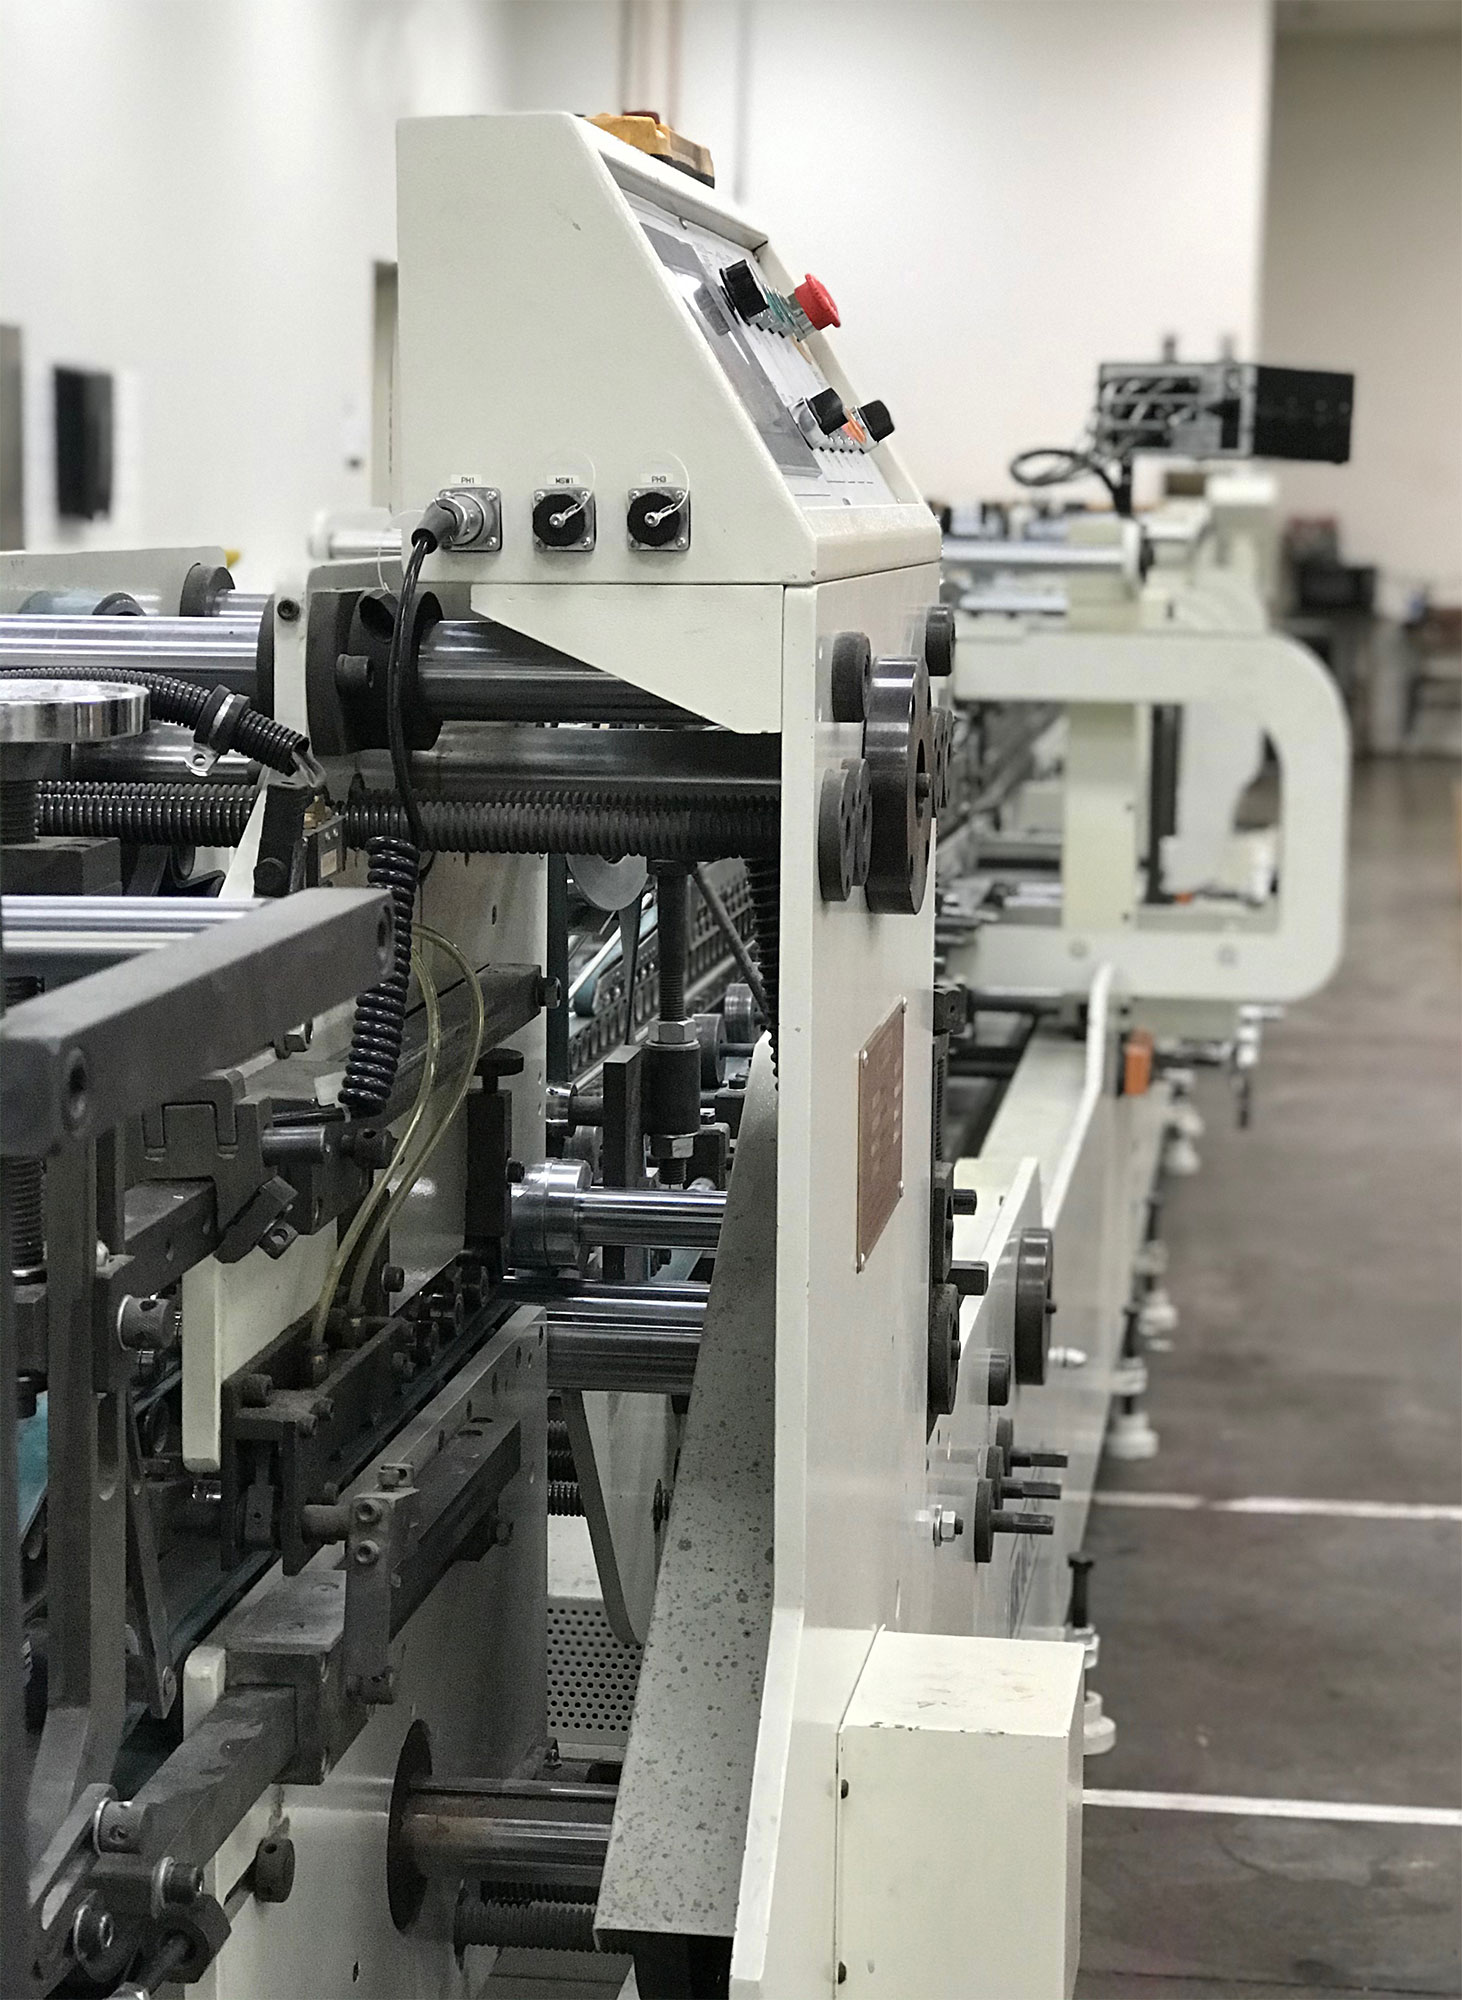 Brausse TA 900 - PrintArt is the national industry leader in Sample Boards, Die Cutting, Laminating, Logistics, Assembly and an extensive Printing Solutions.